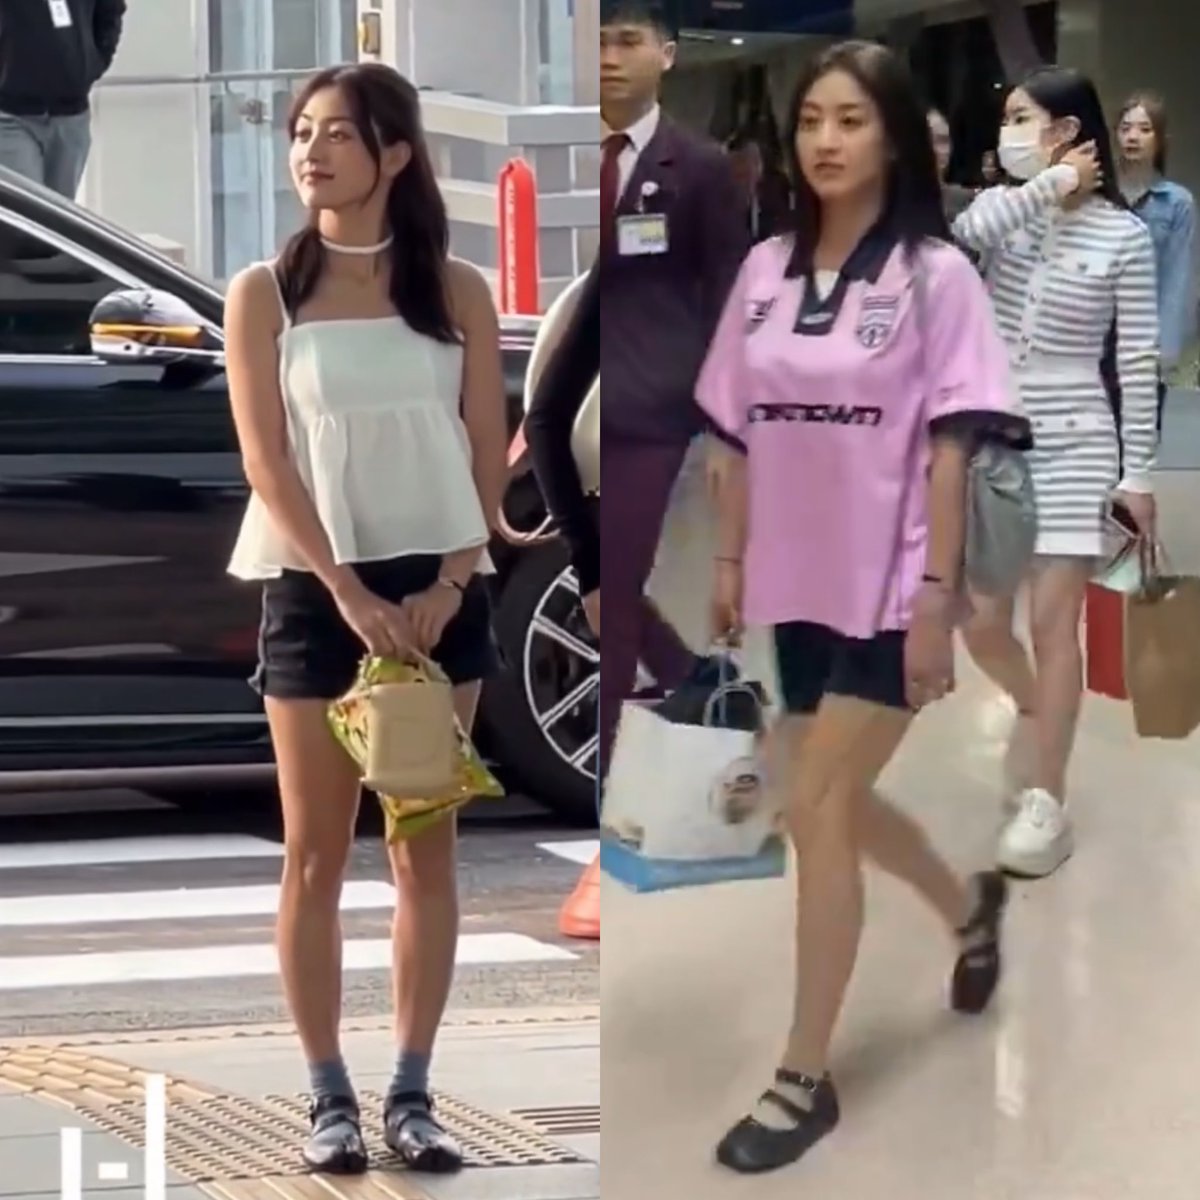 the way jihyo changed her outfit and her socks gone 😭😆

in korea                                    in philippines